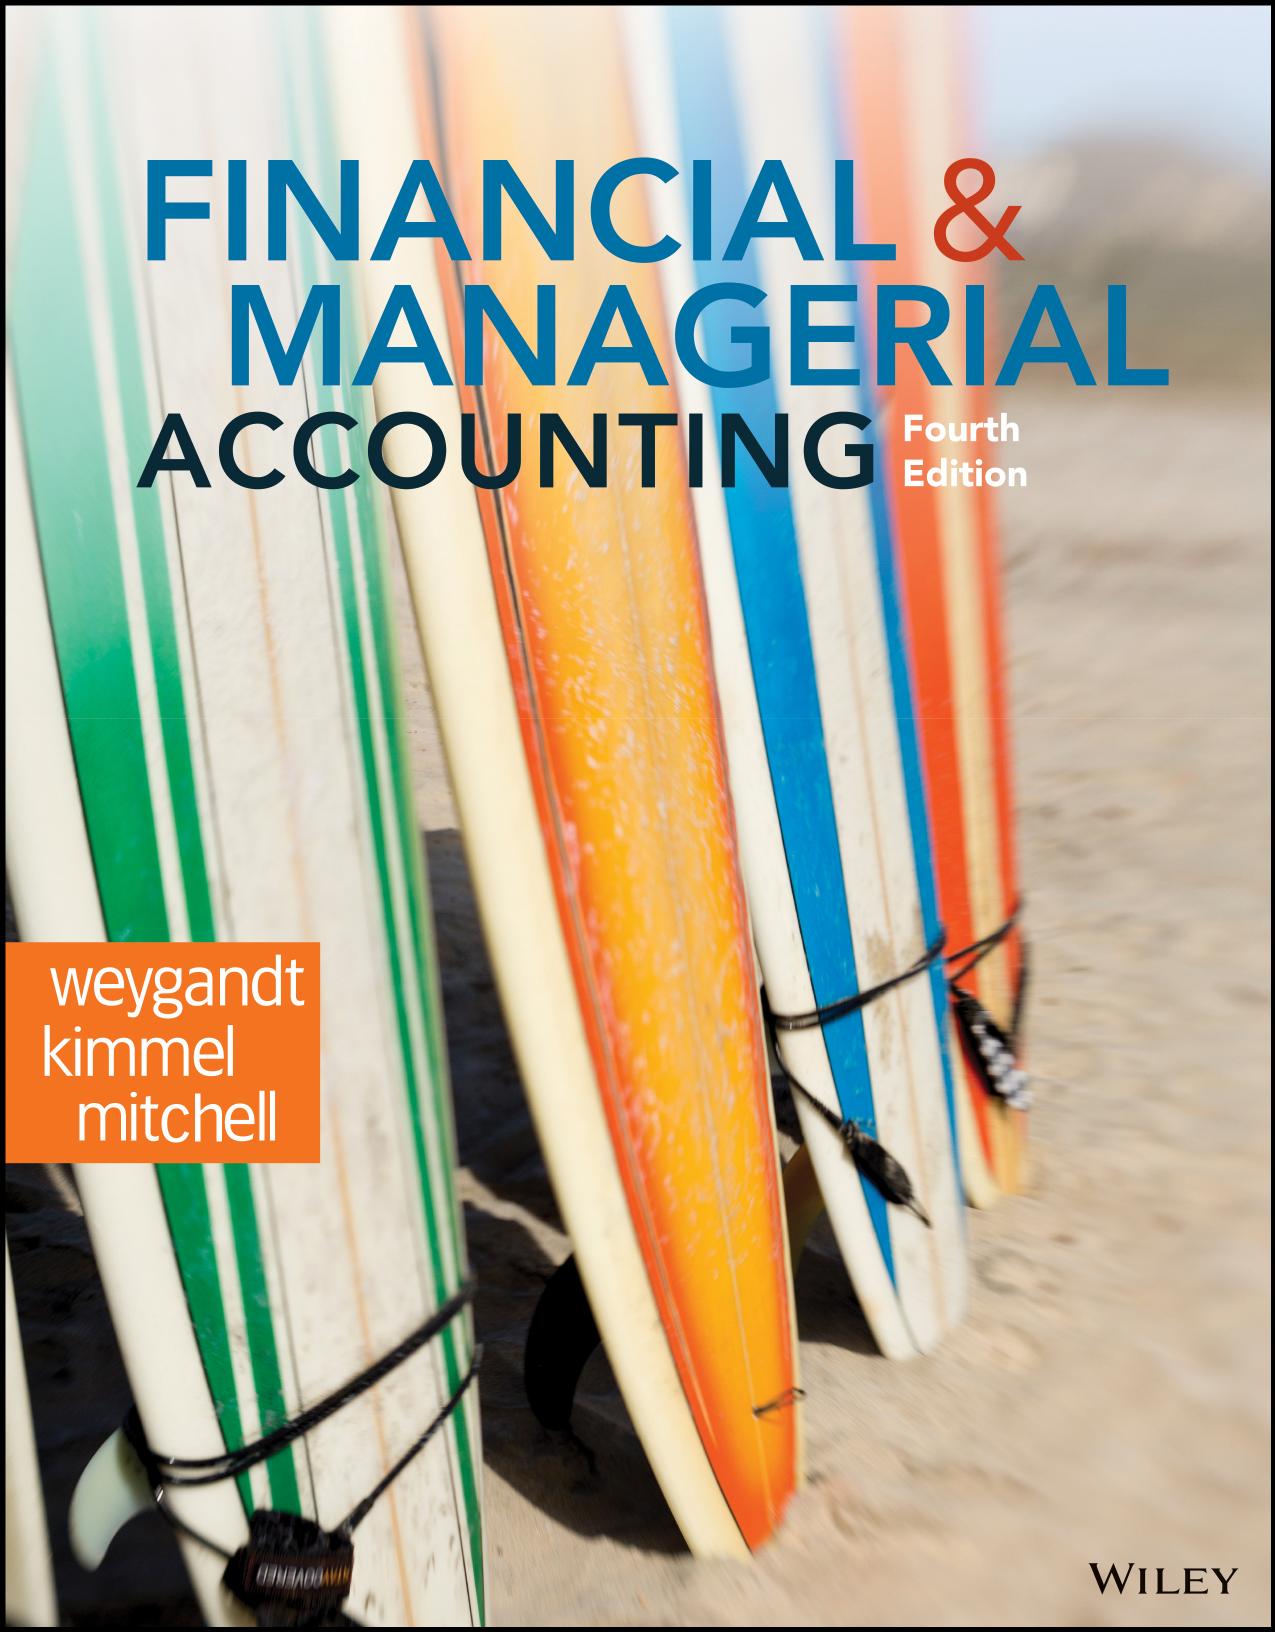 Test Bank for Financial and Managerial Accounting 4th edition by Jerry J. Weygandt, Paul D. Kimmel